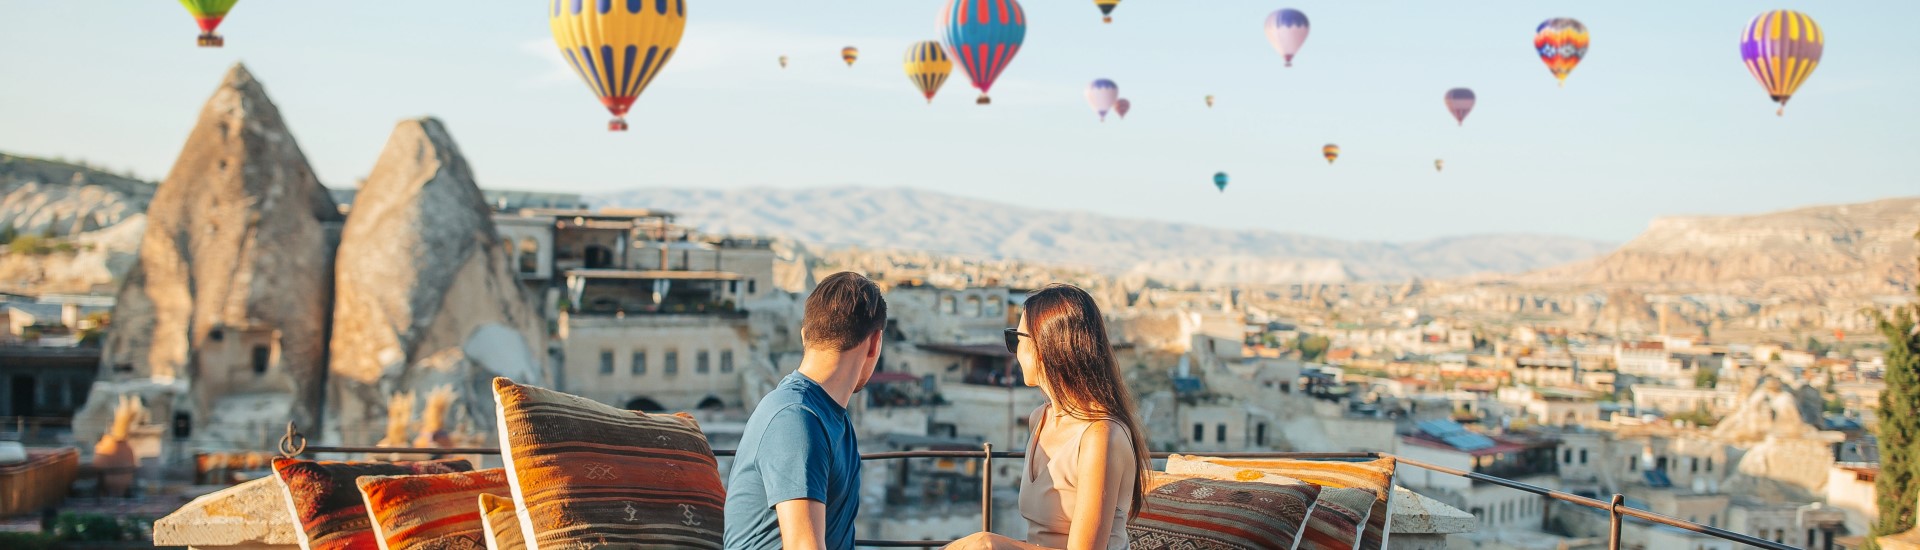 Couple watching hot air balloons during sunset in Cappadocia, Turkey